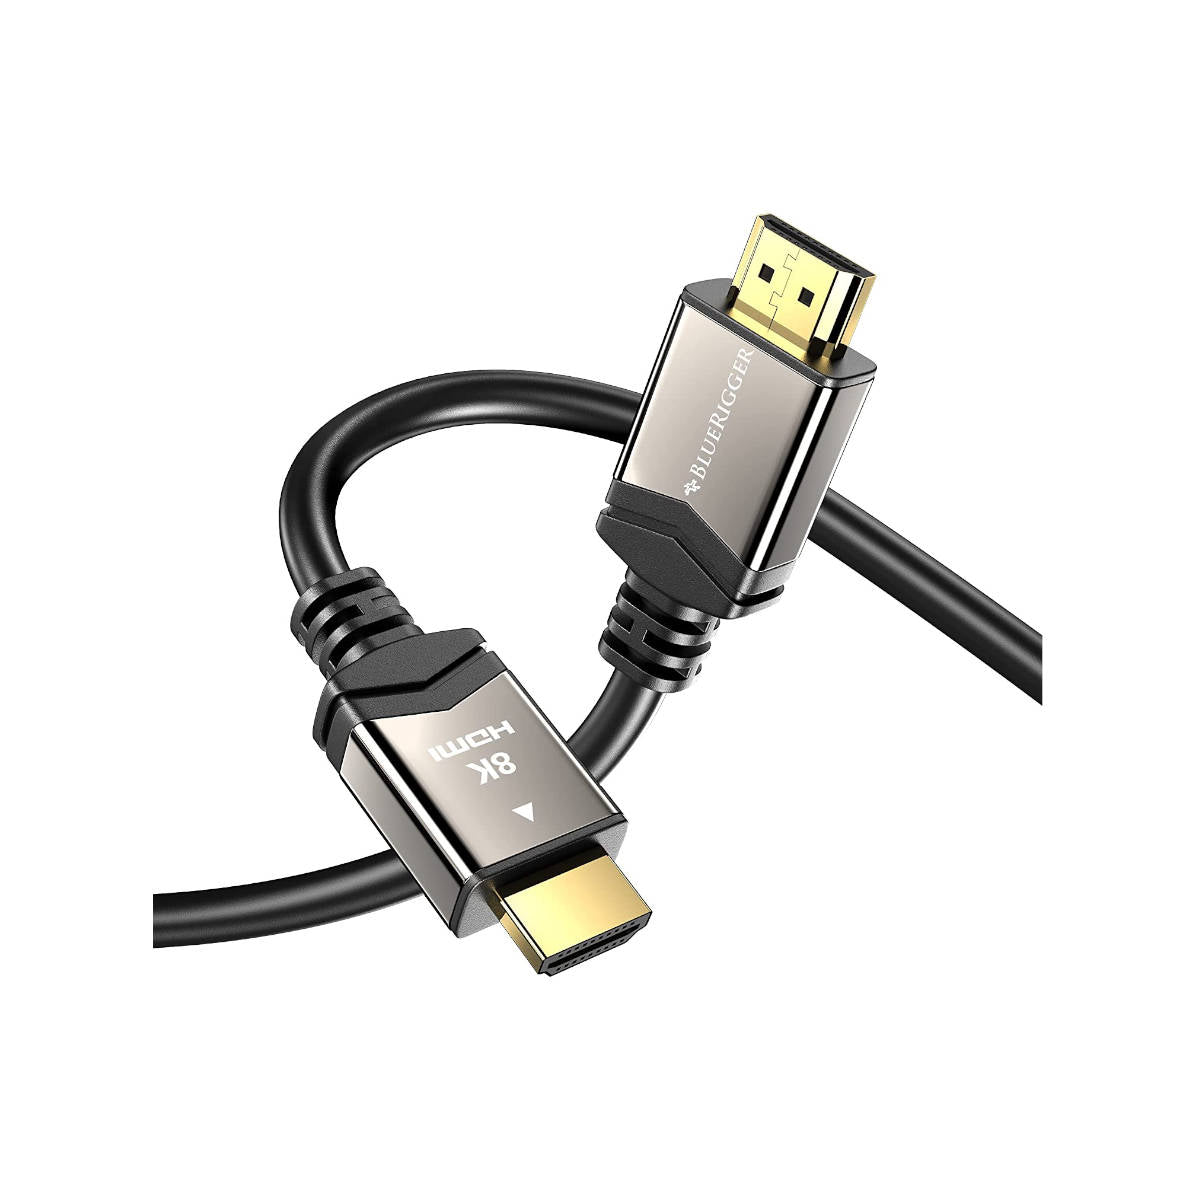 HDMI Cables 4K Resolution Ultra HD, Buy HDMI Cables Online